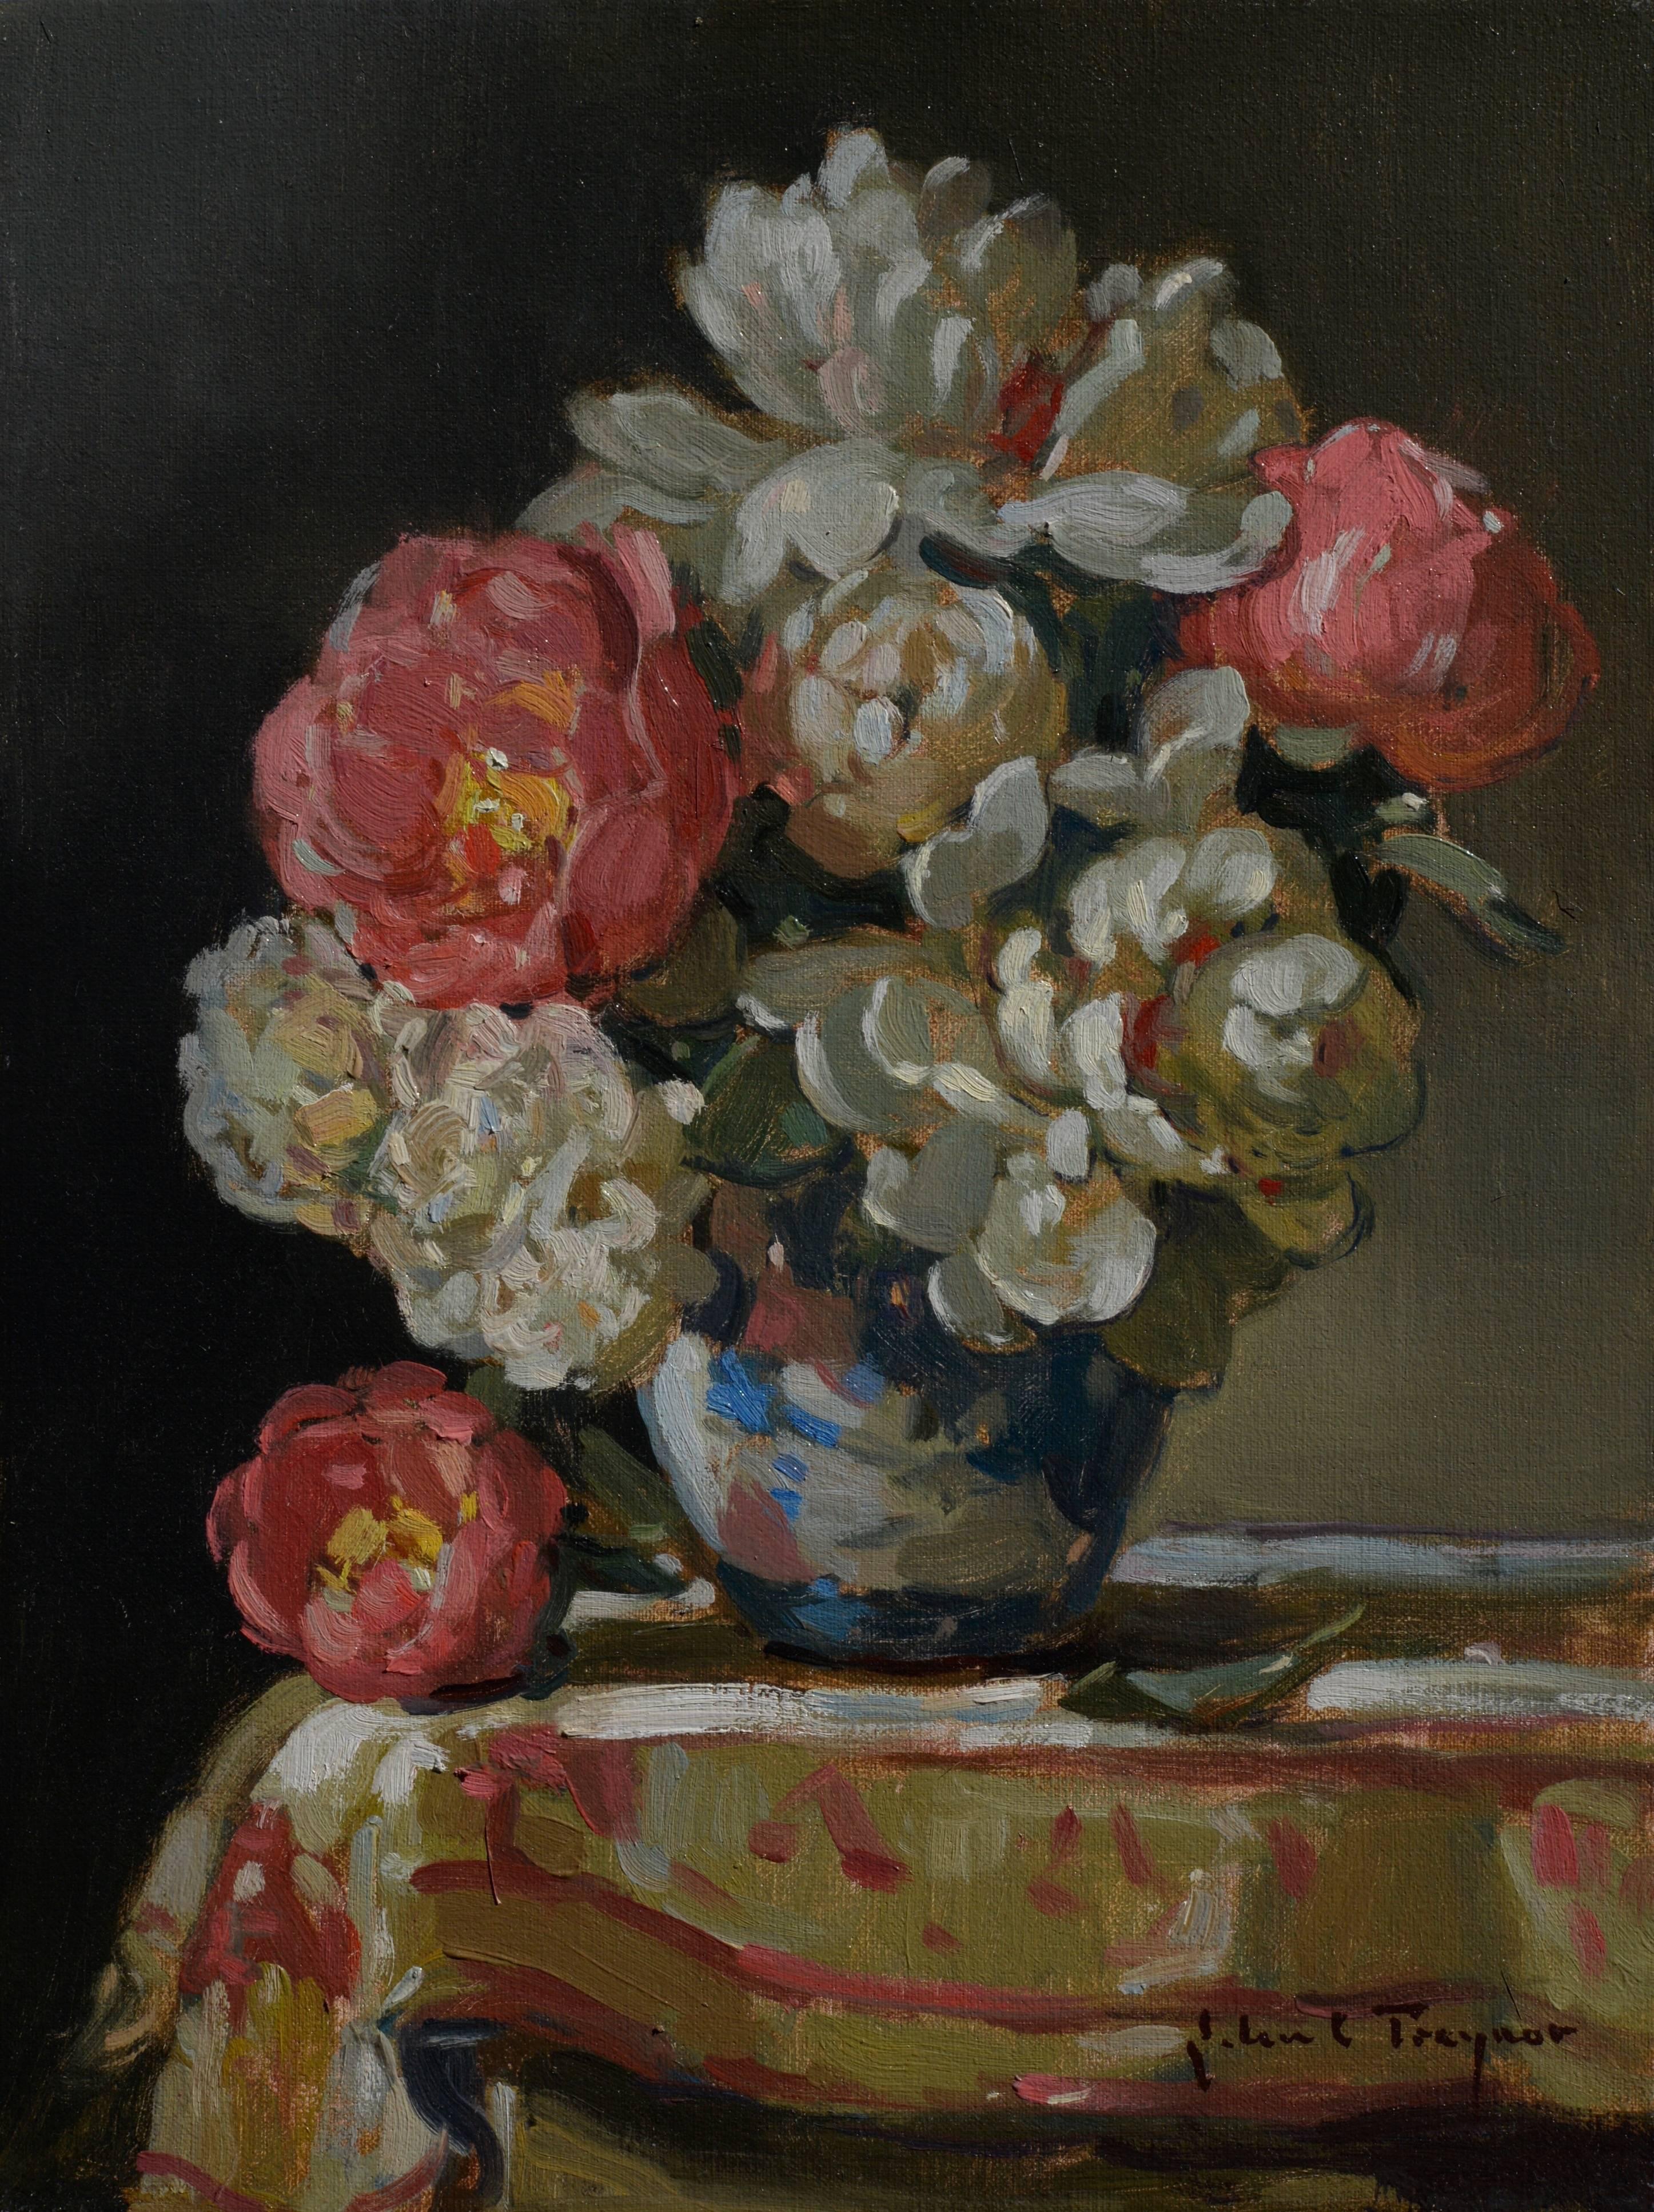 John C. Traynor Still-Life Painting - Pink and White Peonies